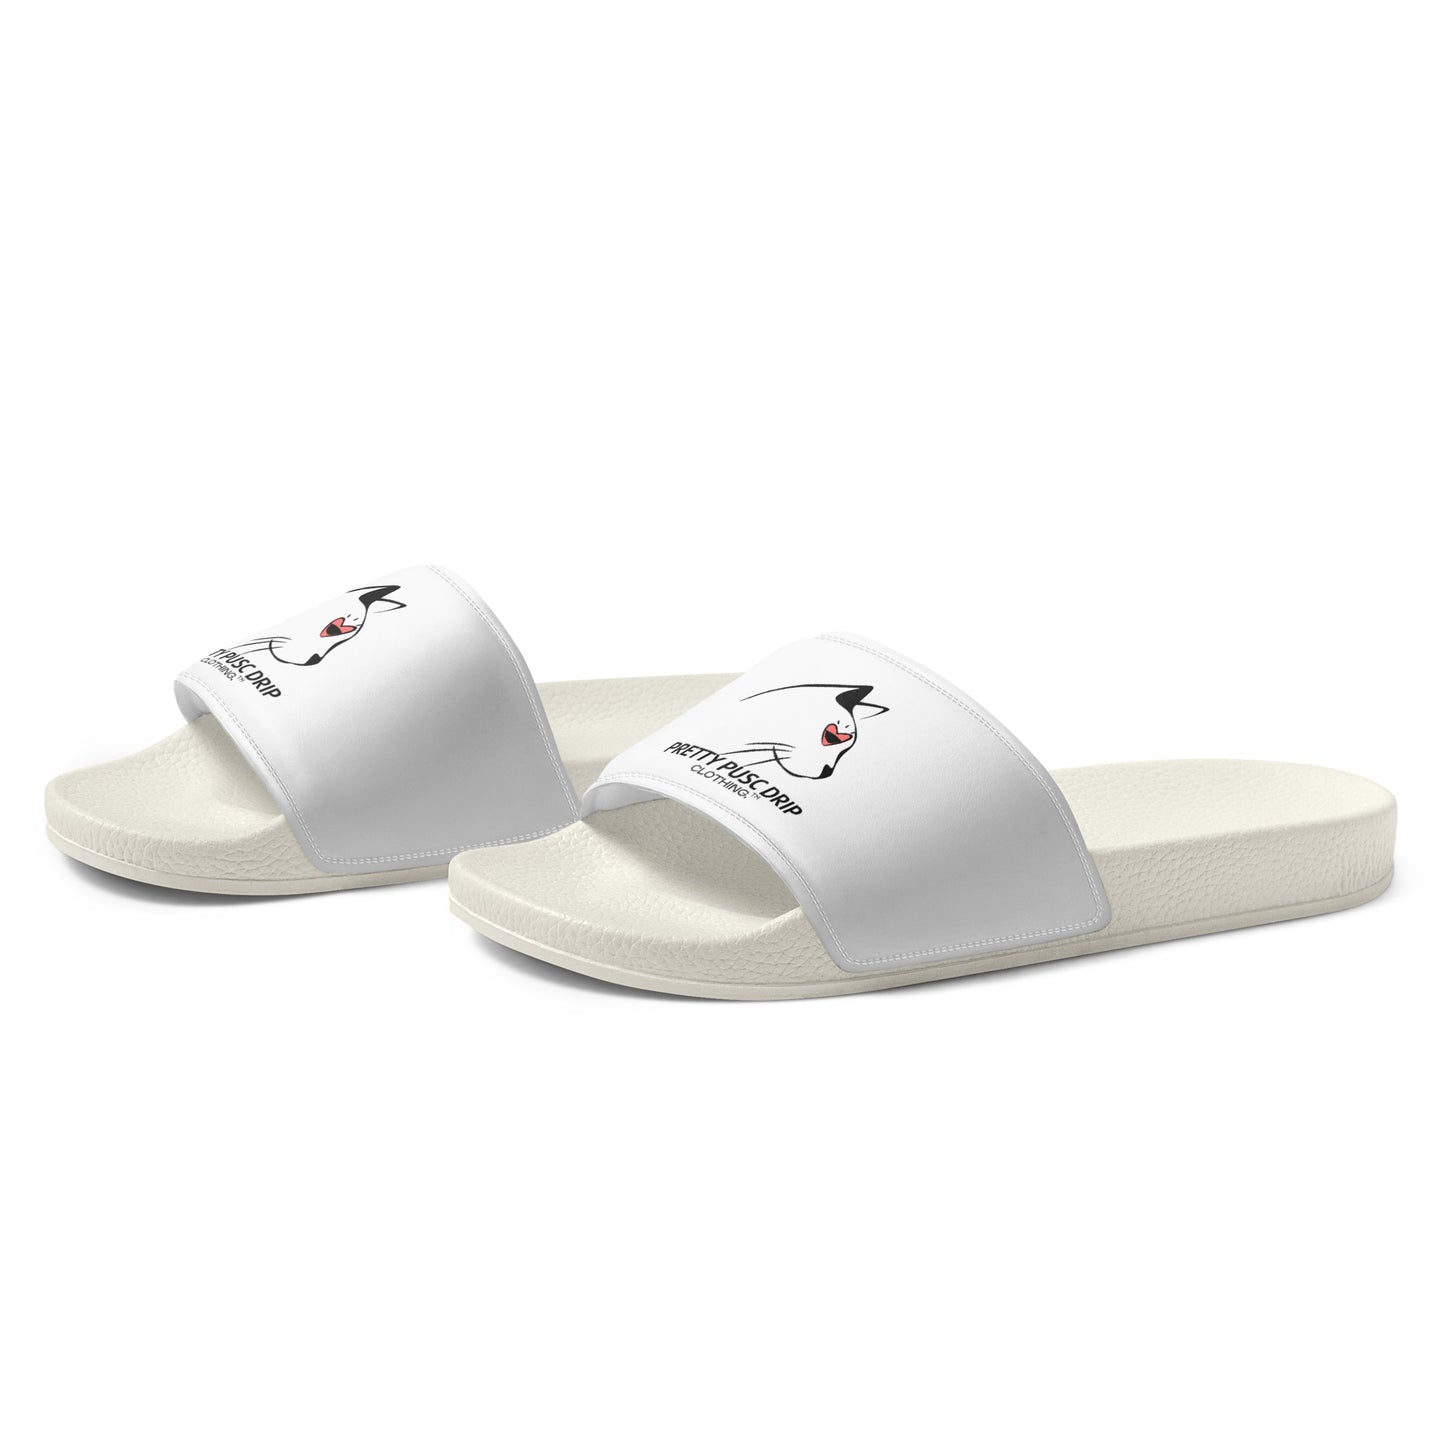 PrettyPuscDrip Authentic Handmade Casual Women's Style Slides